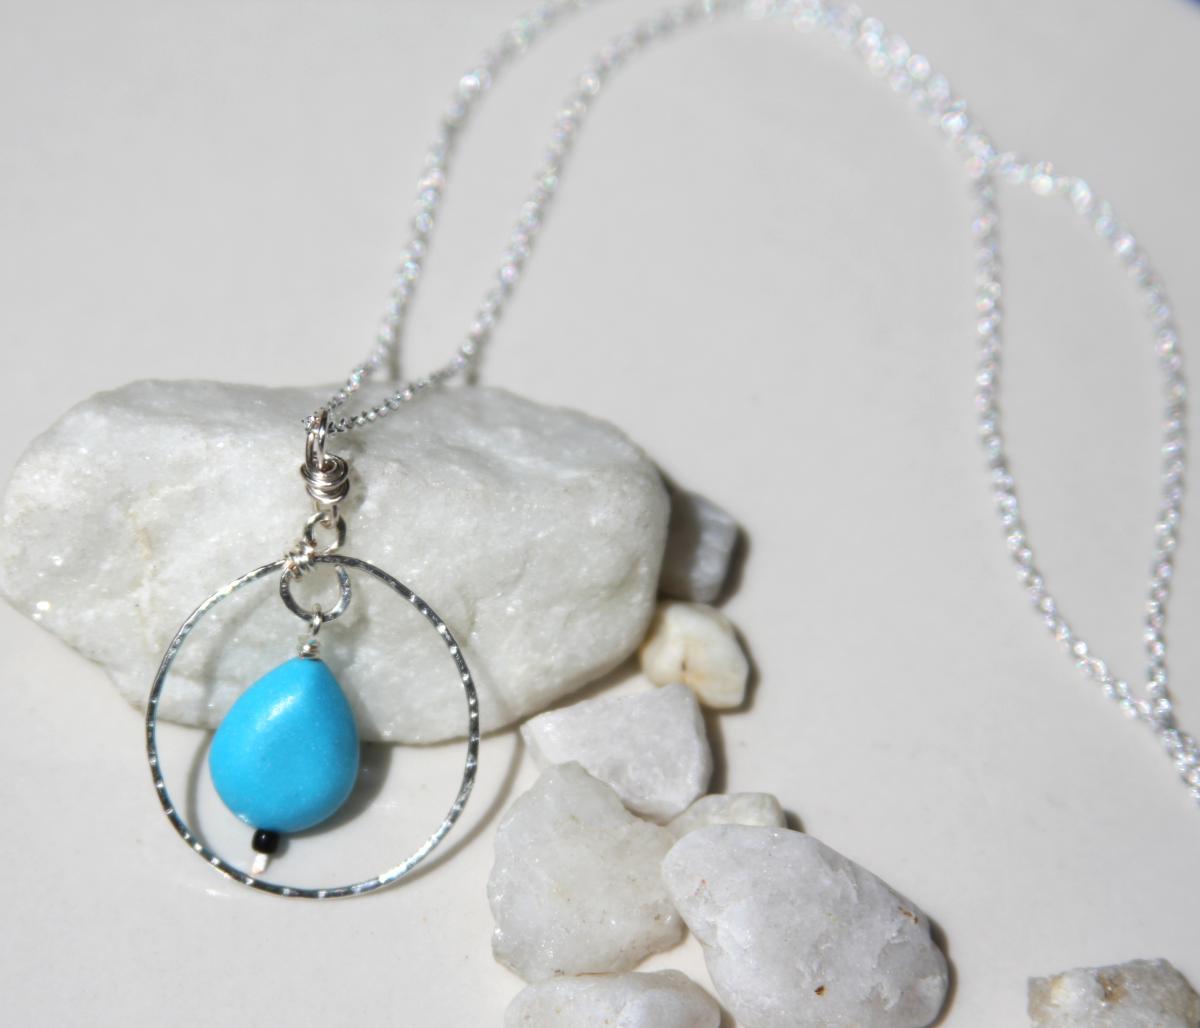 Turquoise Necklace, Turquoise Jewelry, Sterling Silver Circle Karma Necklace With Turquoise Bead Handmade